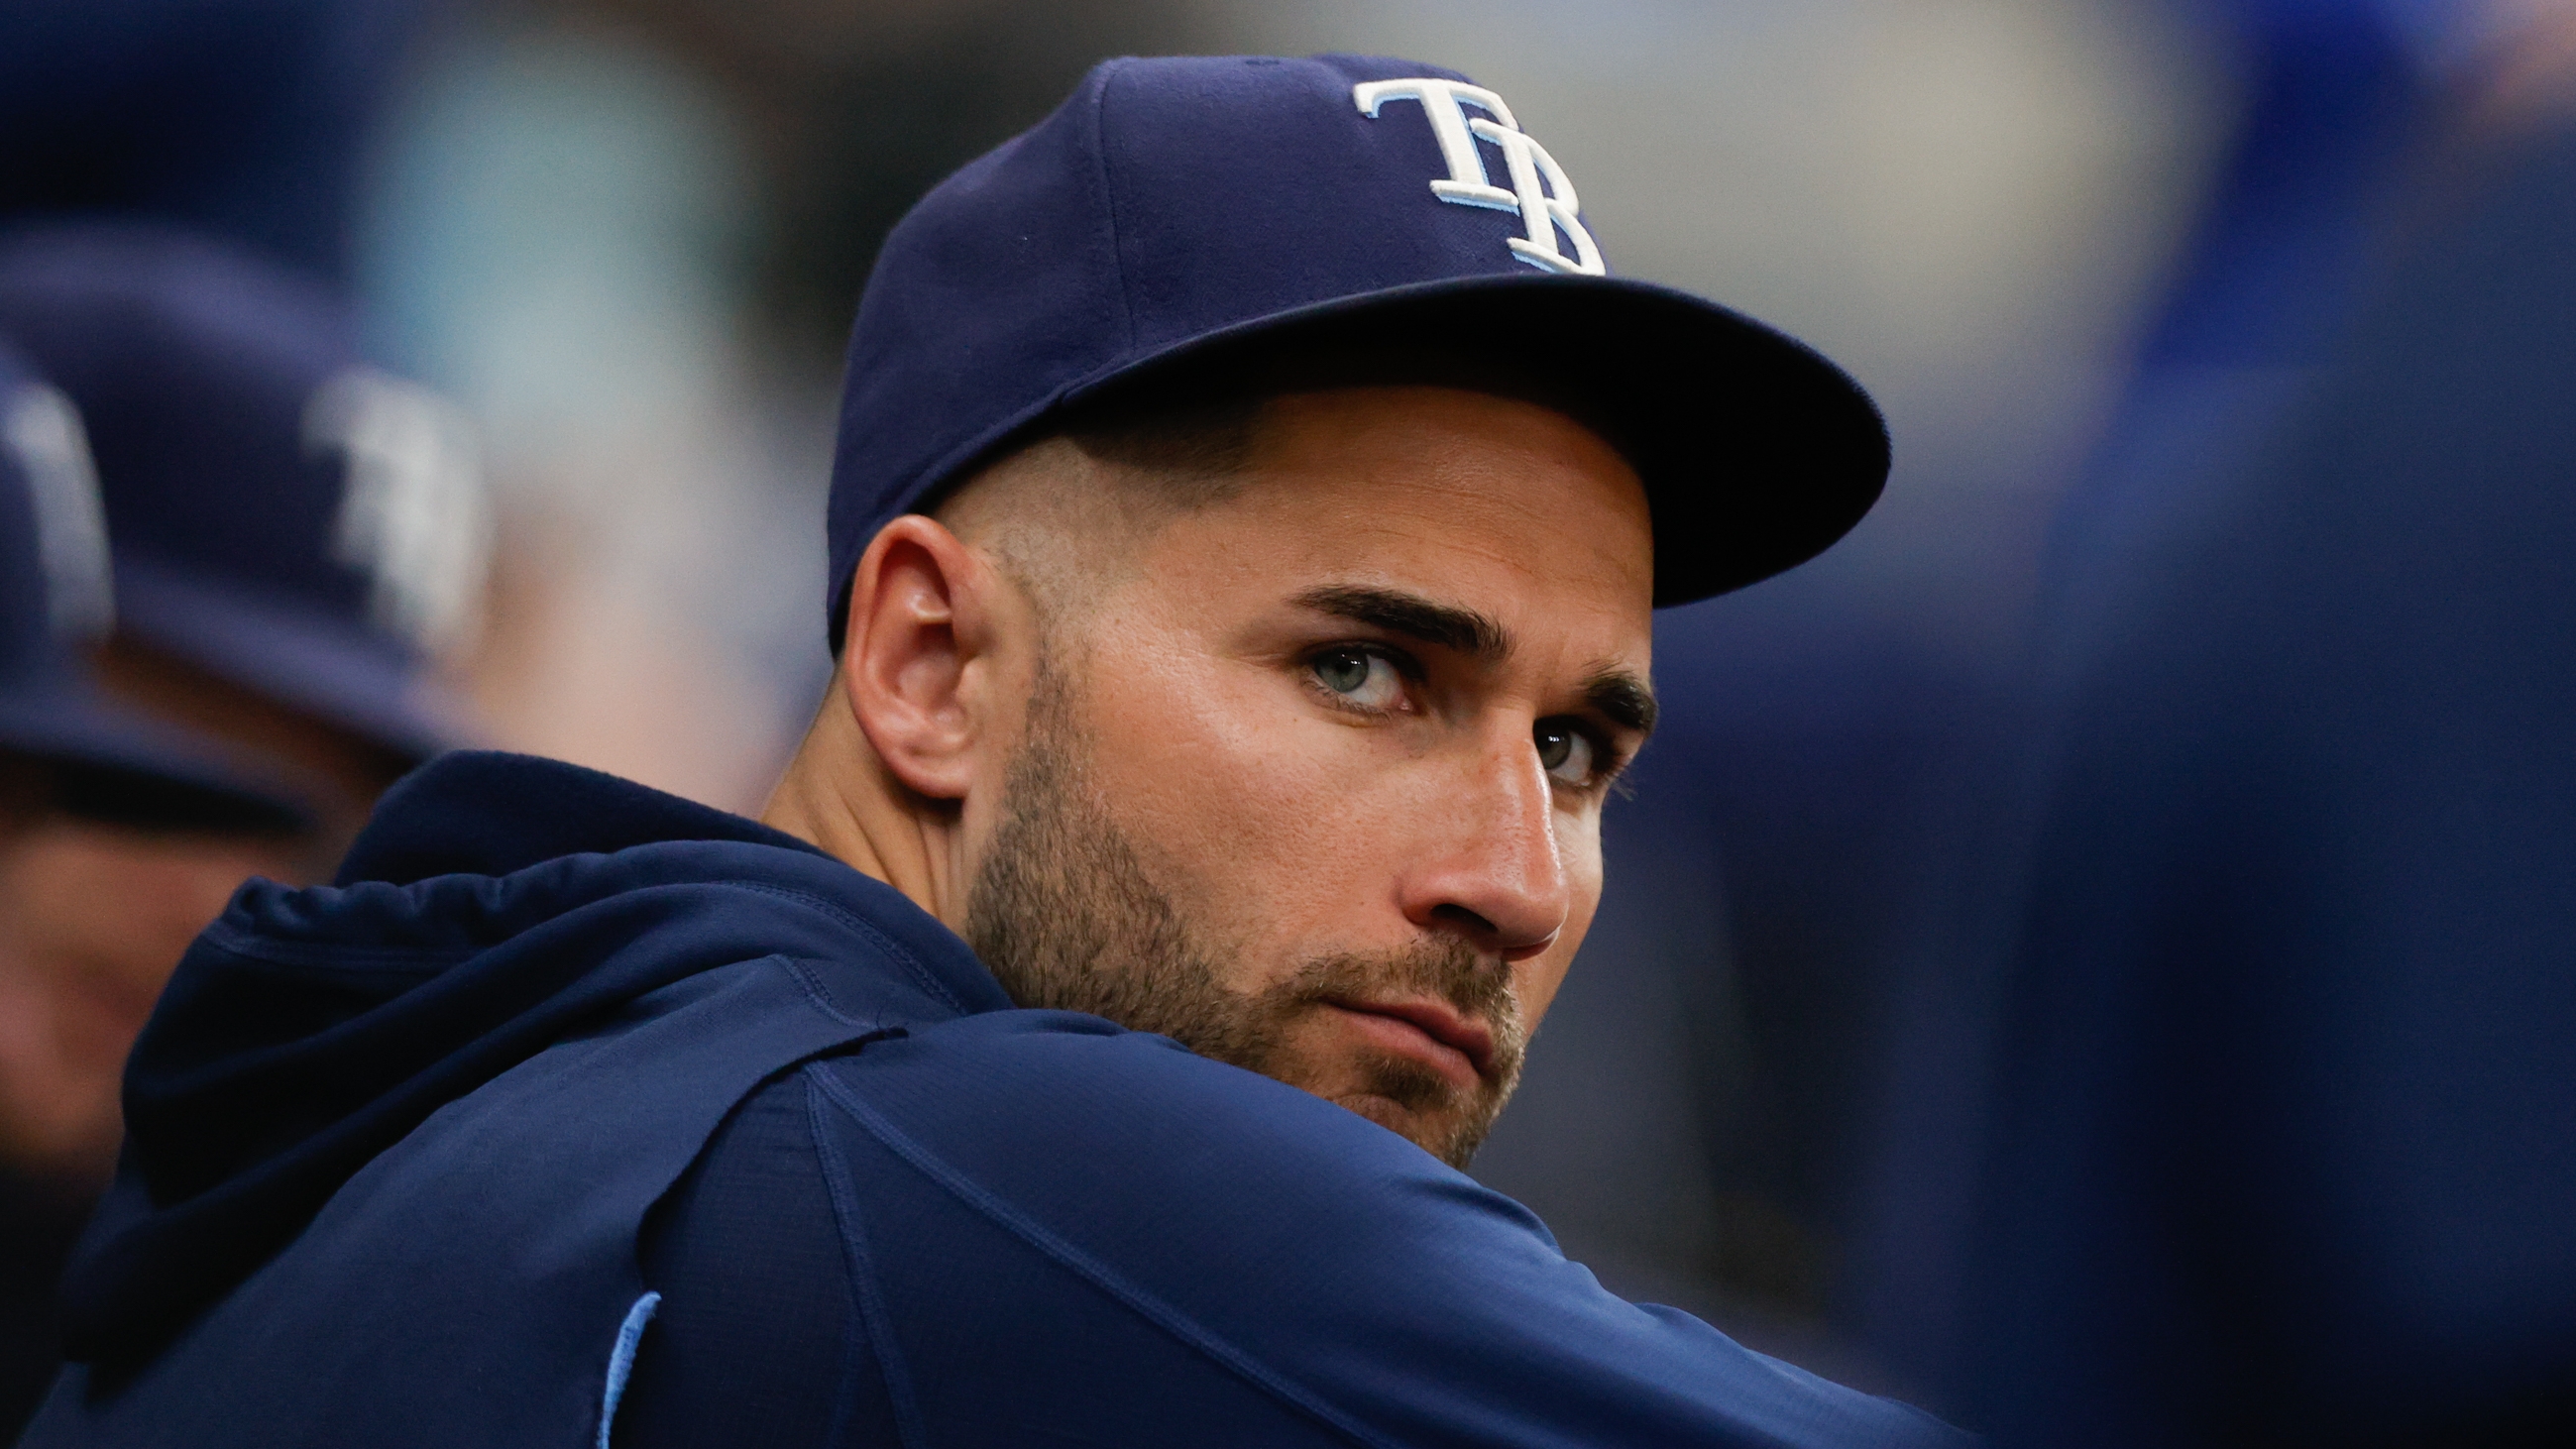 Tampa Bay Rays: Kevin Kiermaier is Not Going Anywhere – Nor Should He